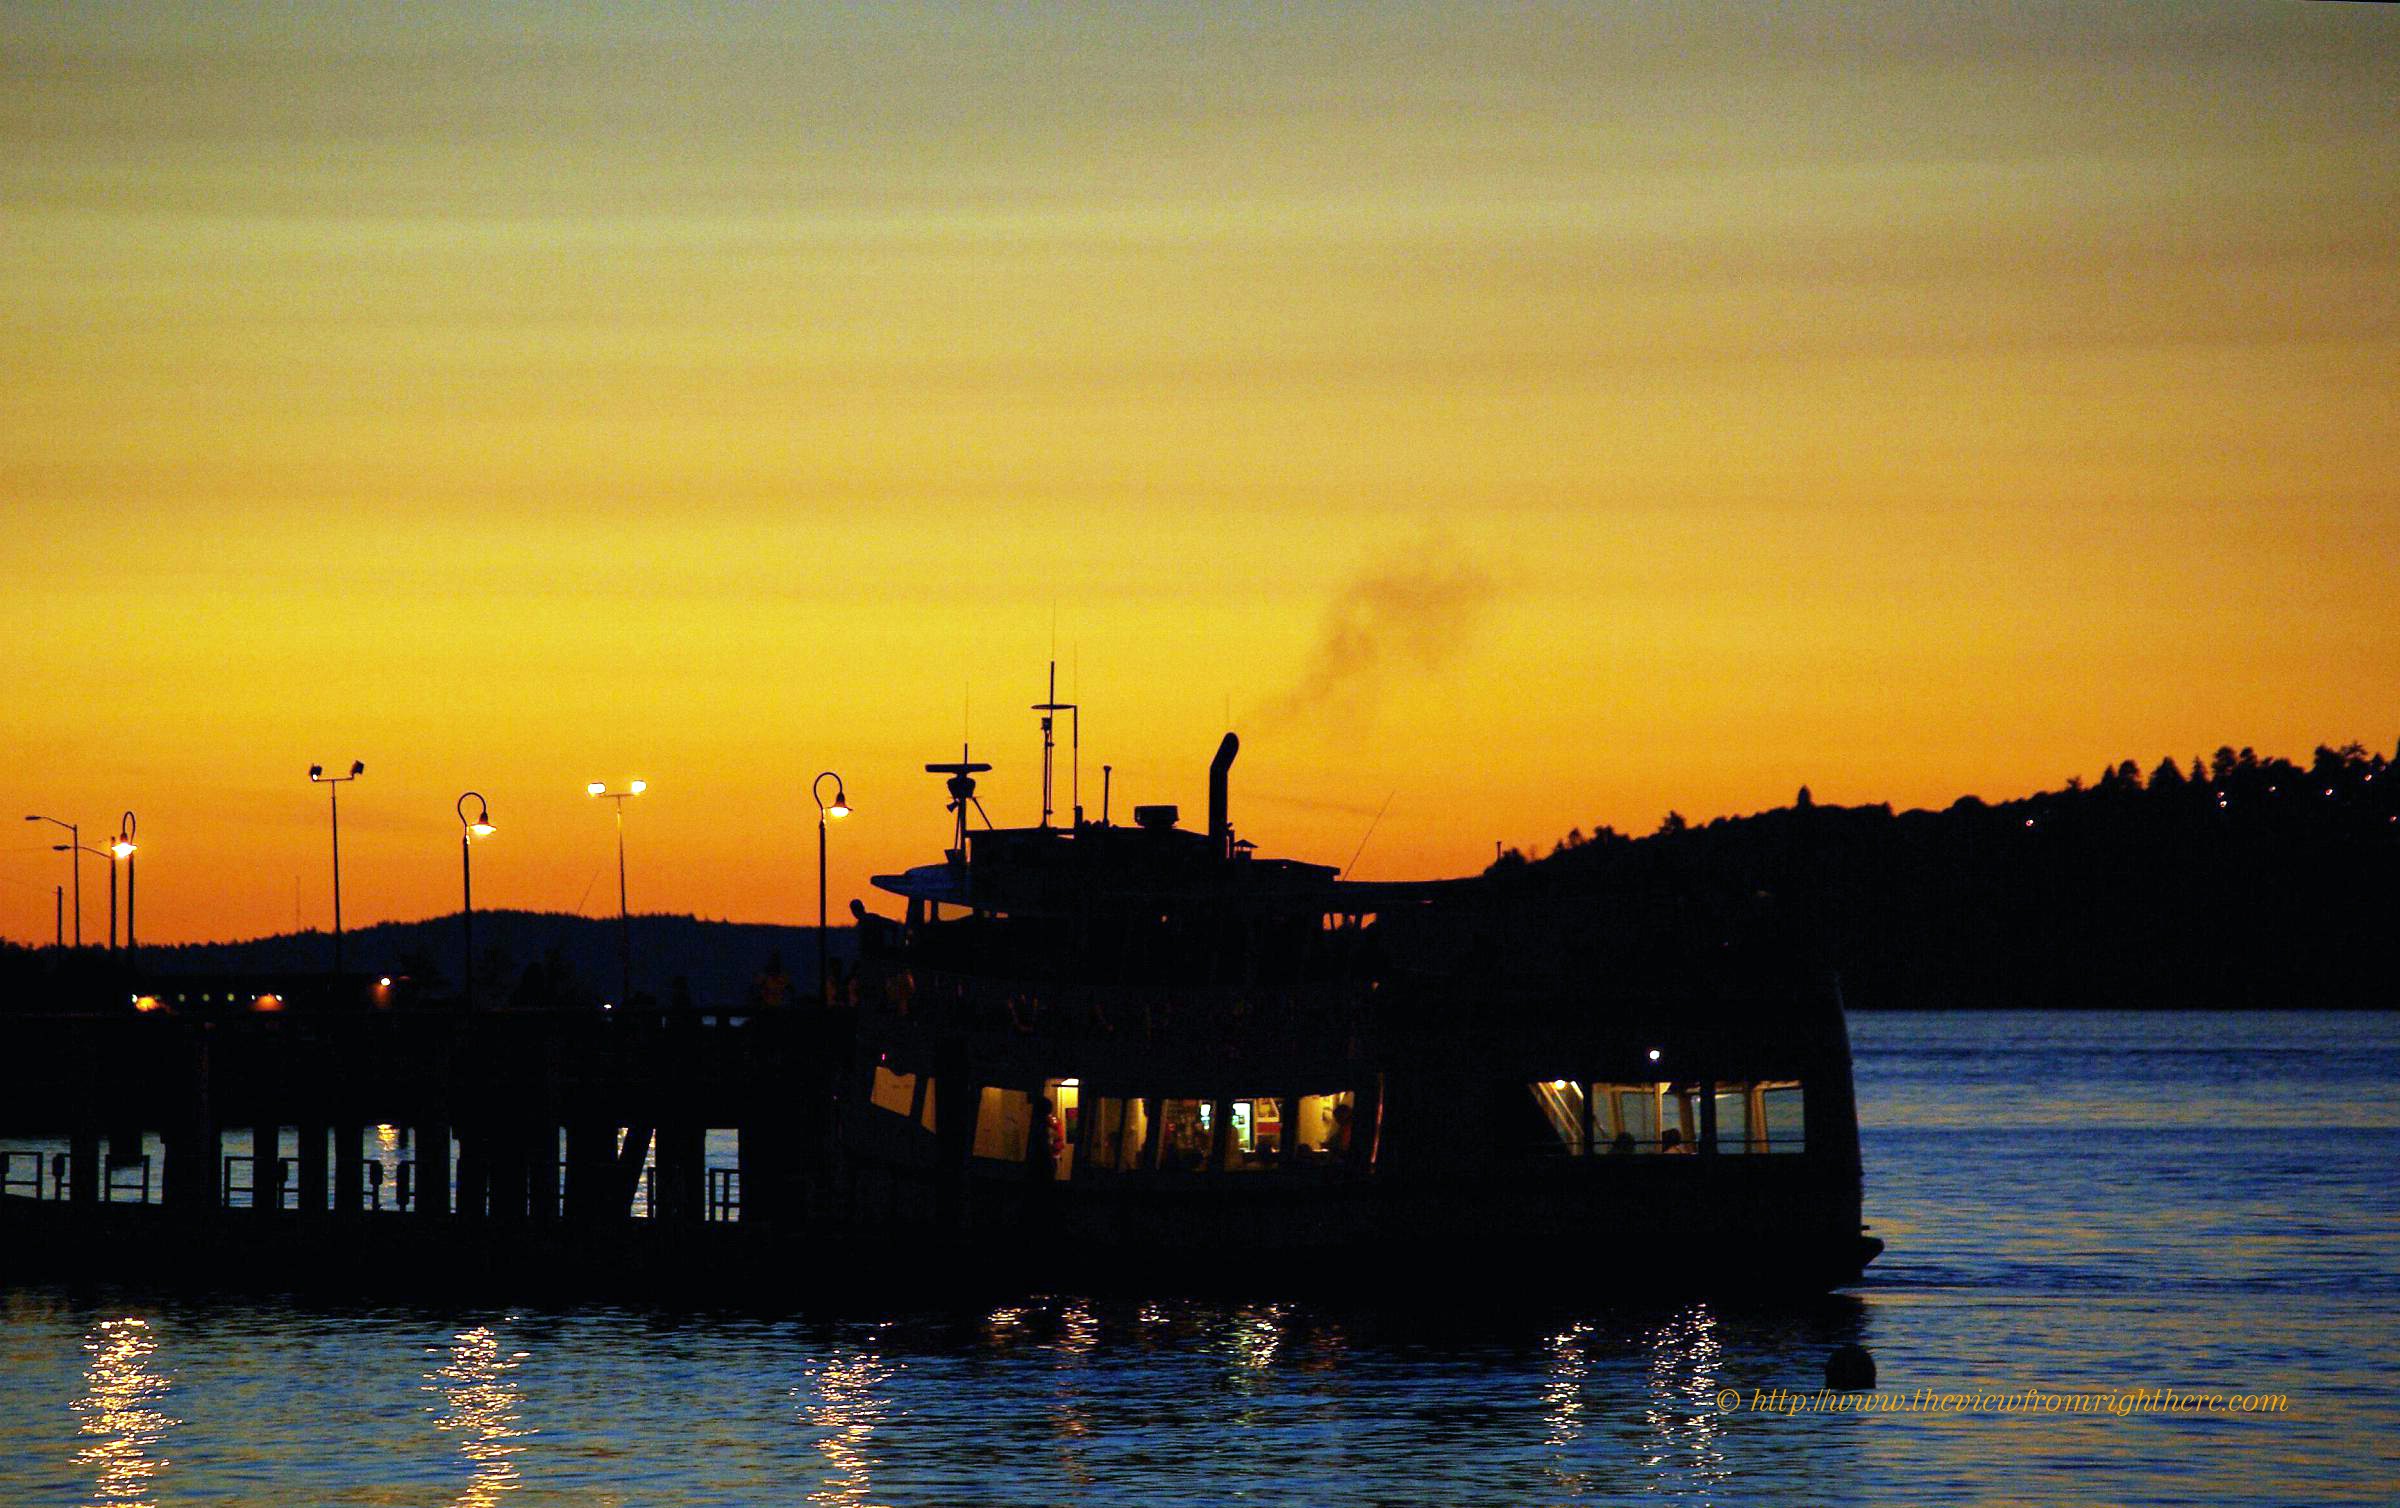 West Seattle Water Taxi at Sunset